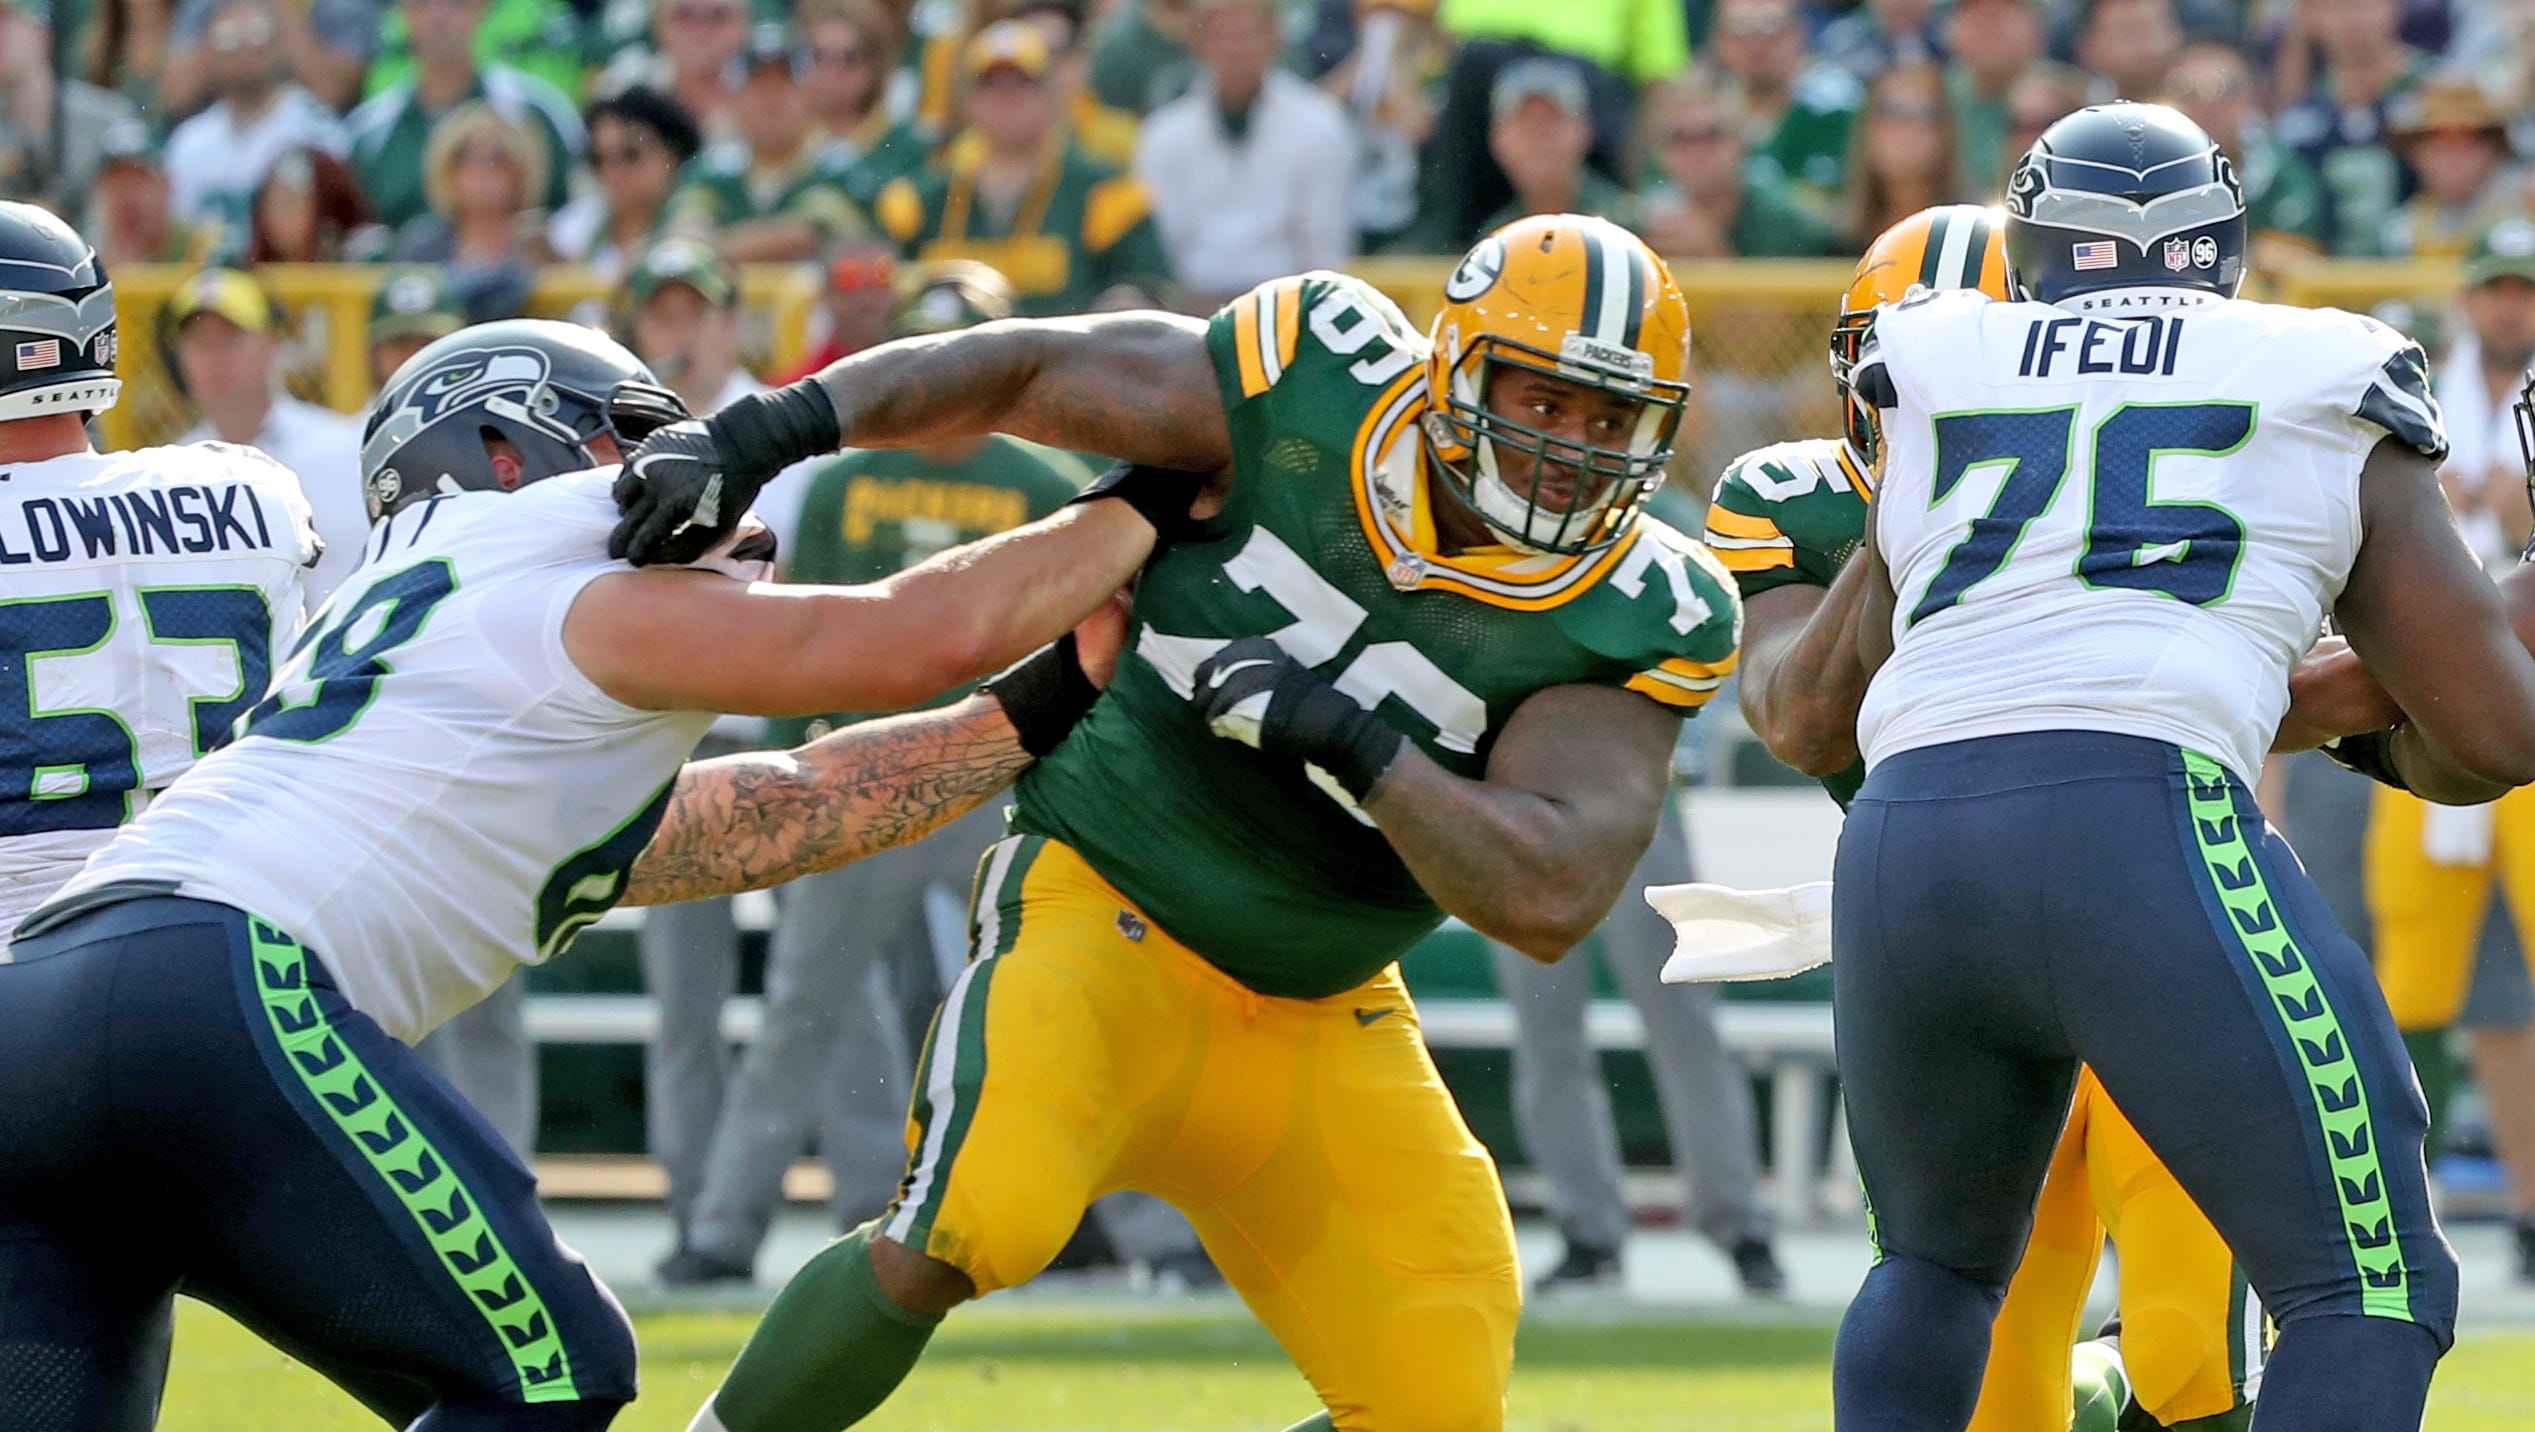 Green Bay Packers defensive end Mike Daniels (76)  breaks through the line of scrimmage against the Seattle Seahawks on Sept. 10, 2017, at Lambeau Field in Green Bay.